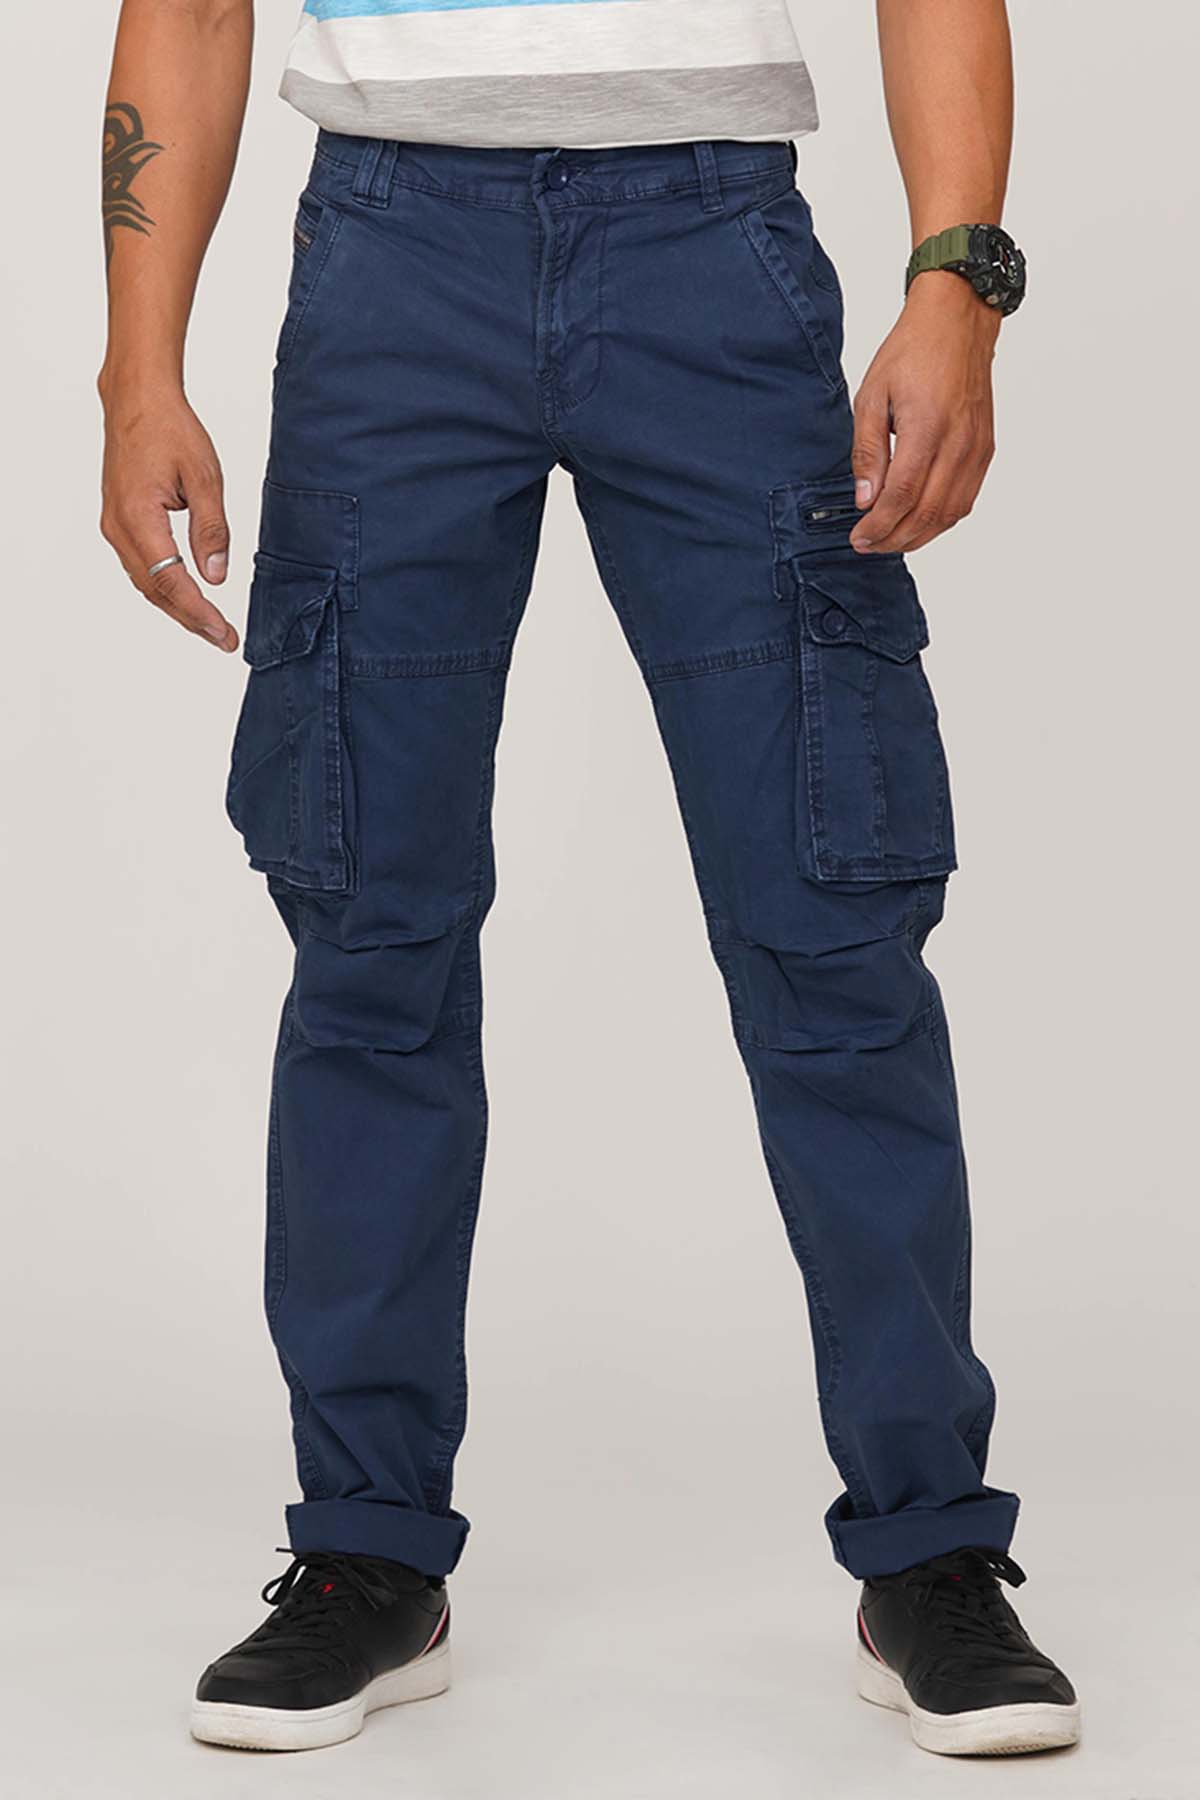 MEN AND WOMEN 6 POCKET CARGO PANTS WITHOUT GRIP